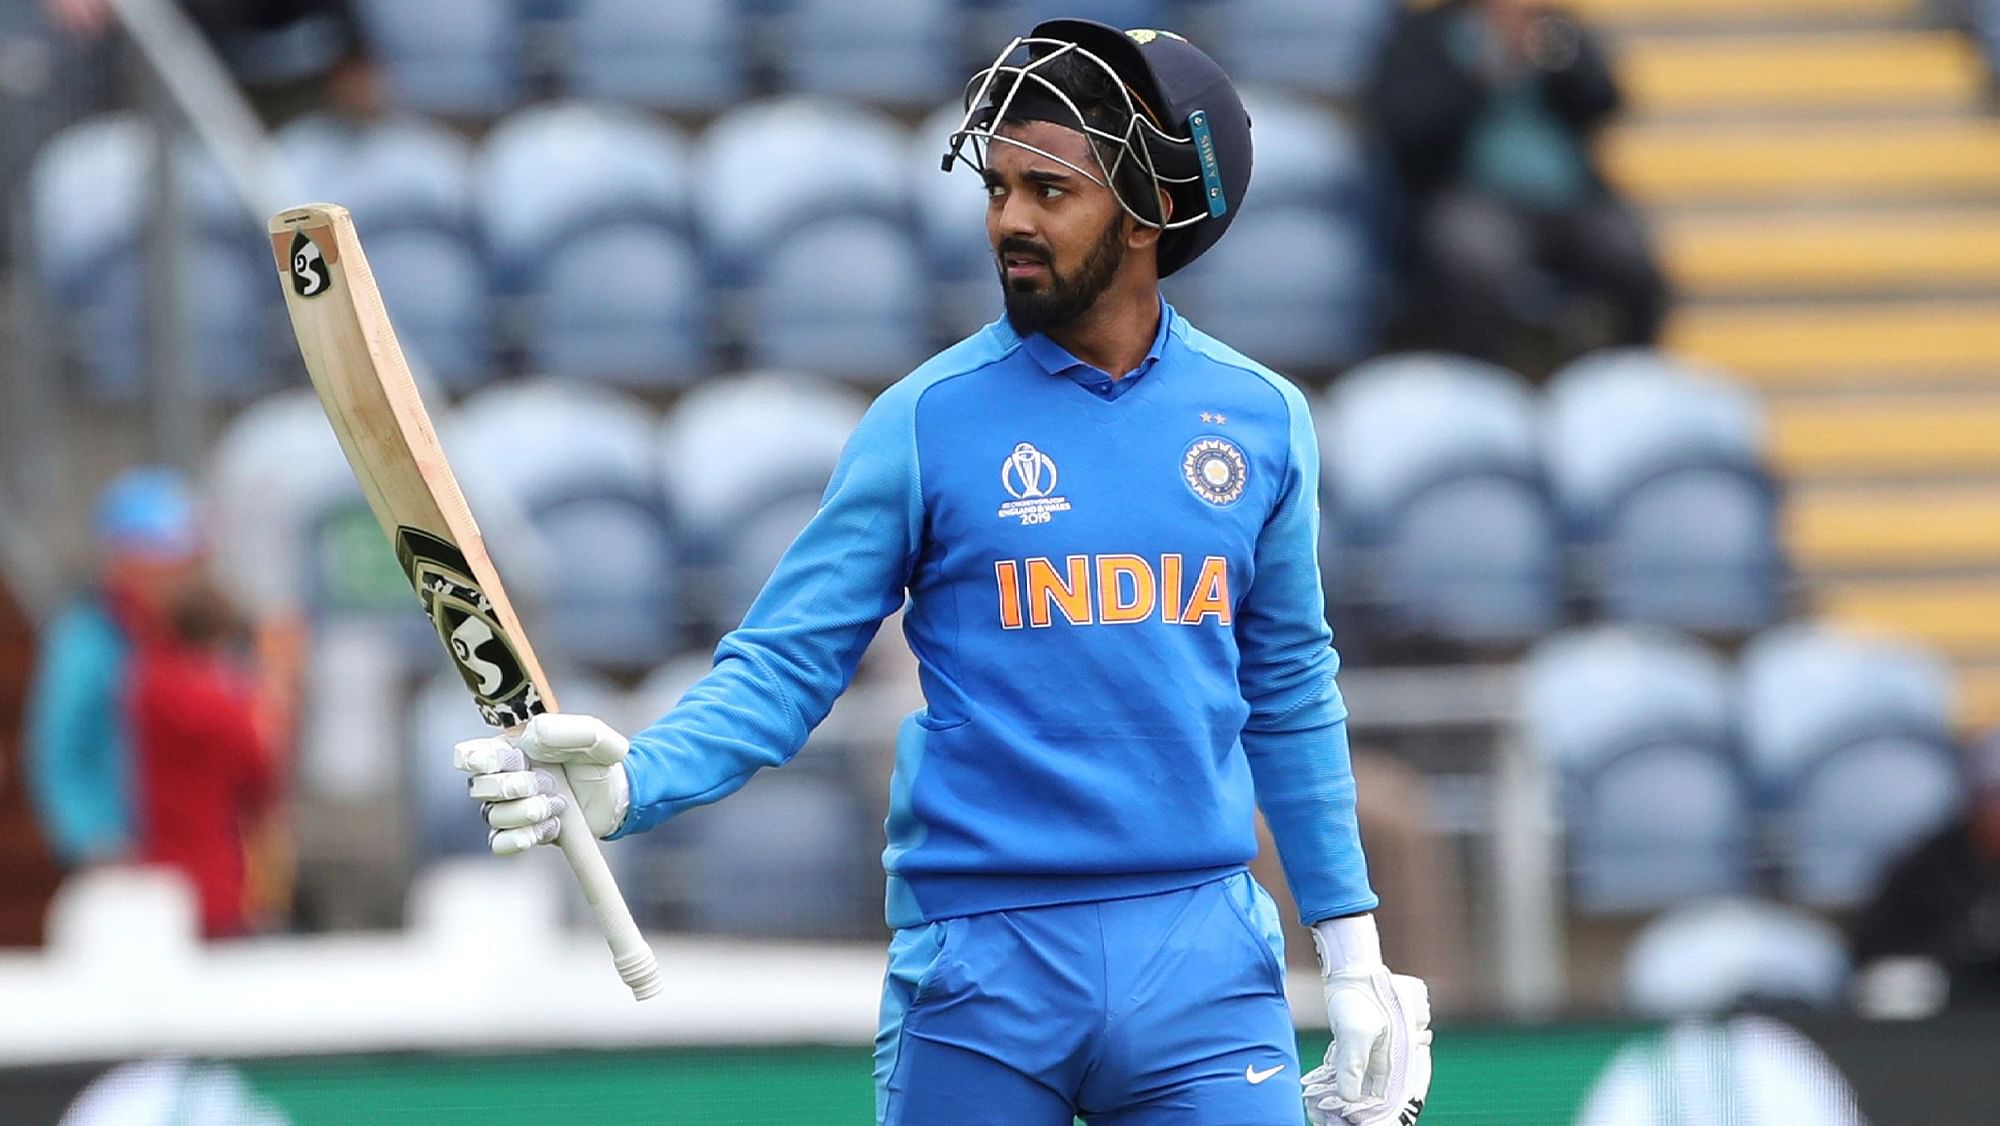 KL Rahul is auctioning the bat he used during the 2019 World Cup to raise funds for vulnerable children.